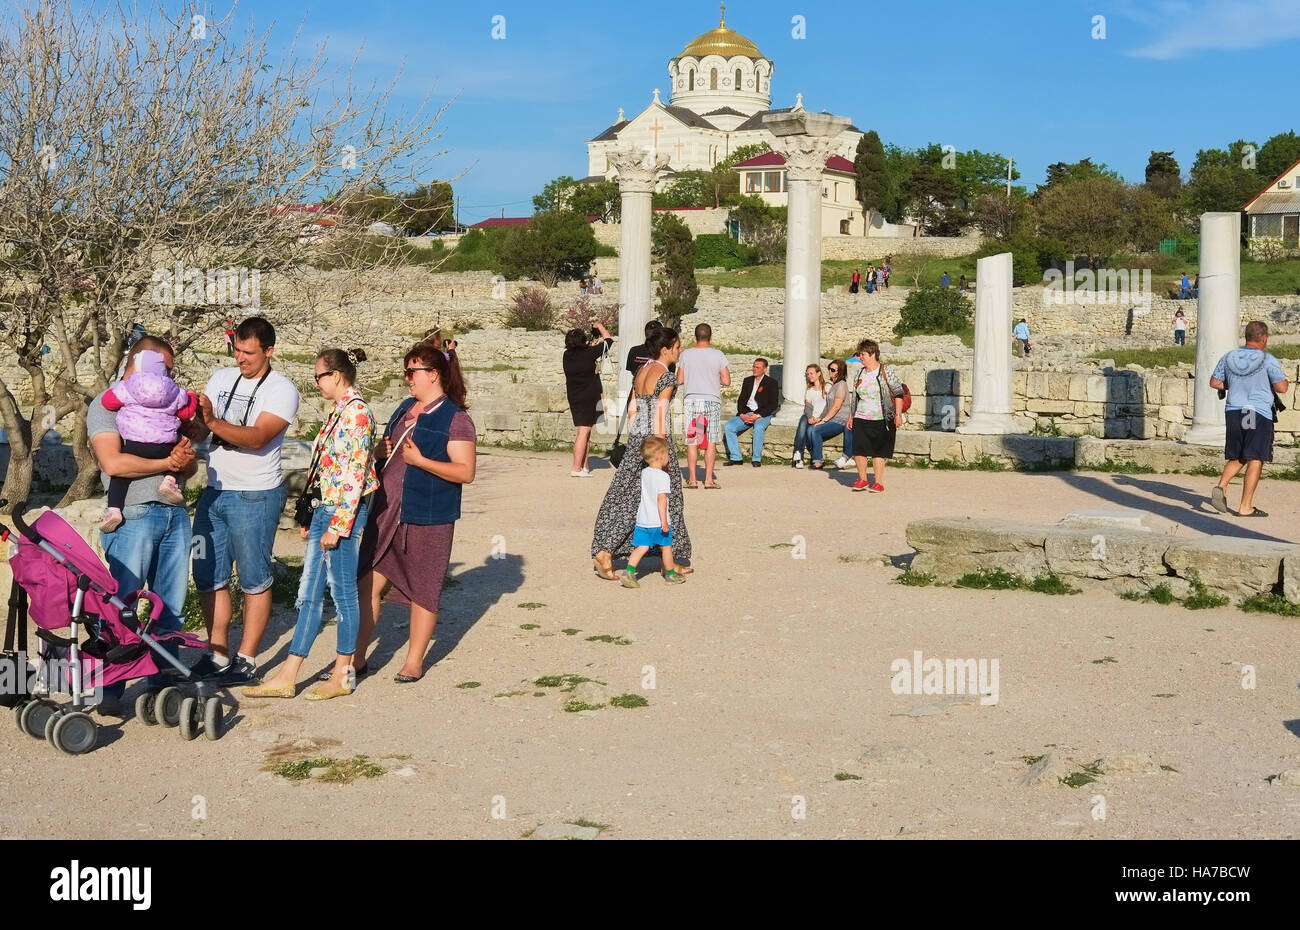 Tourists at St Vladimir's Cathedral and ancient ruins of Chersonesus Taurica Crimea Stock Photo